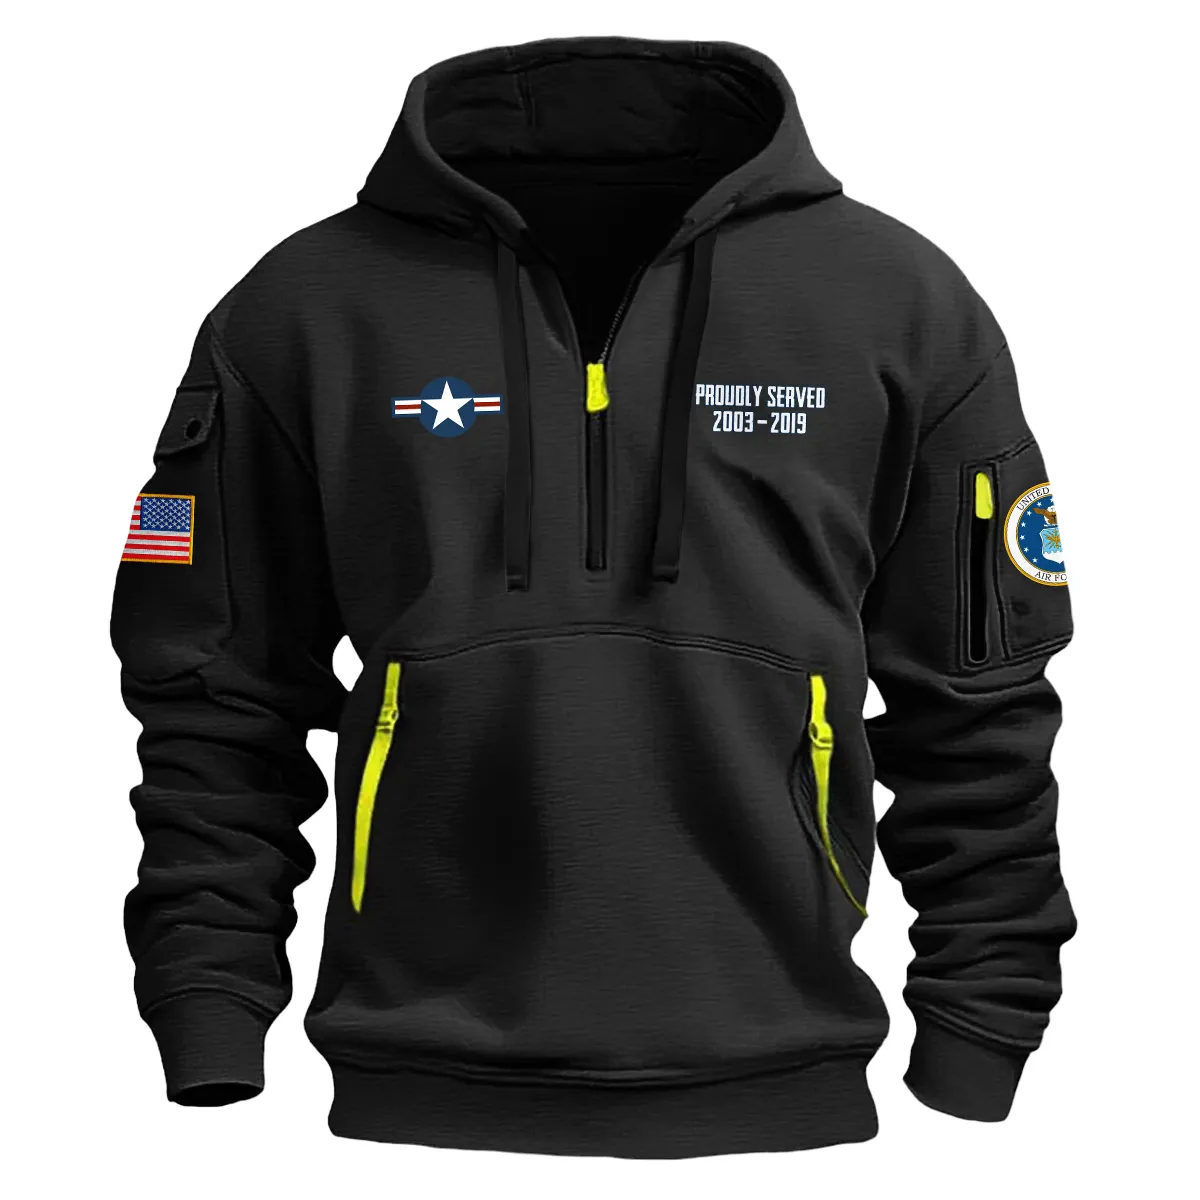 US Military All Branches! Personalized Gift E6-TSGT U.S. Air Force Fashion Hoodie Half Zipper